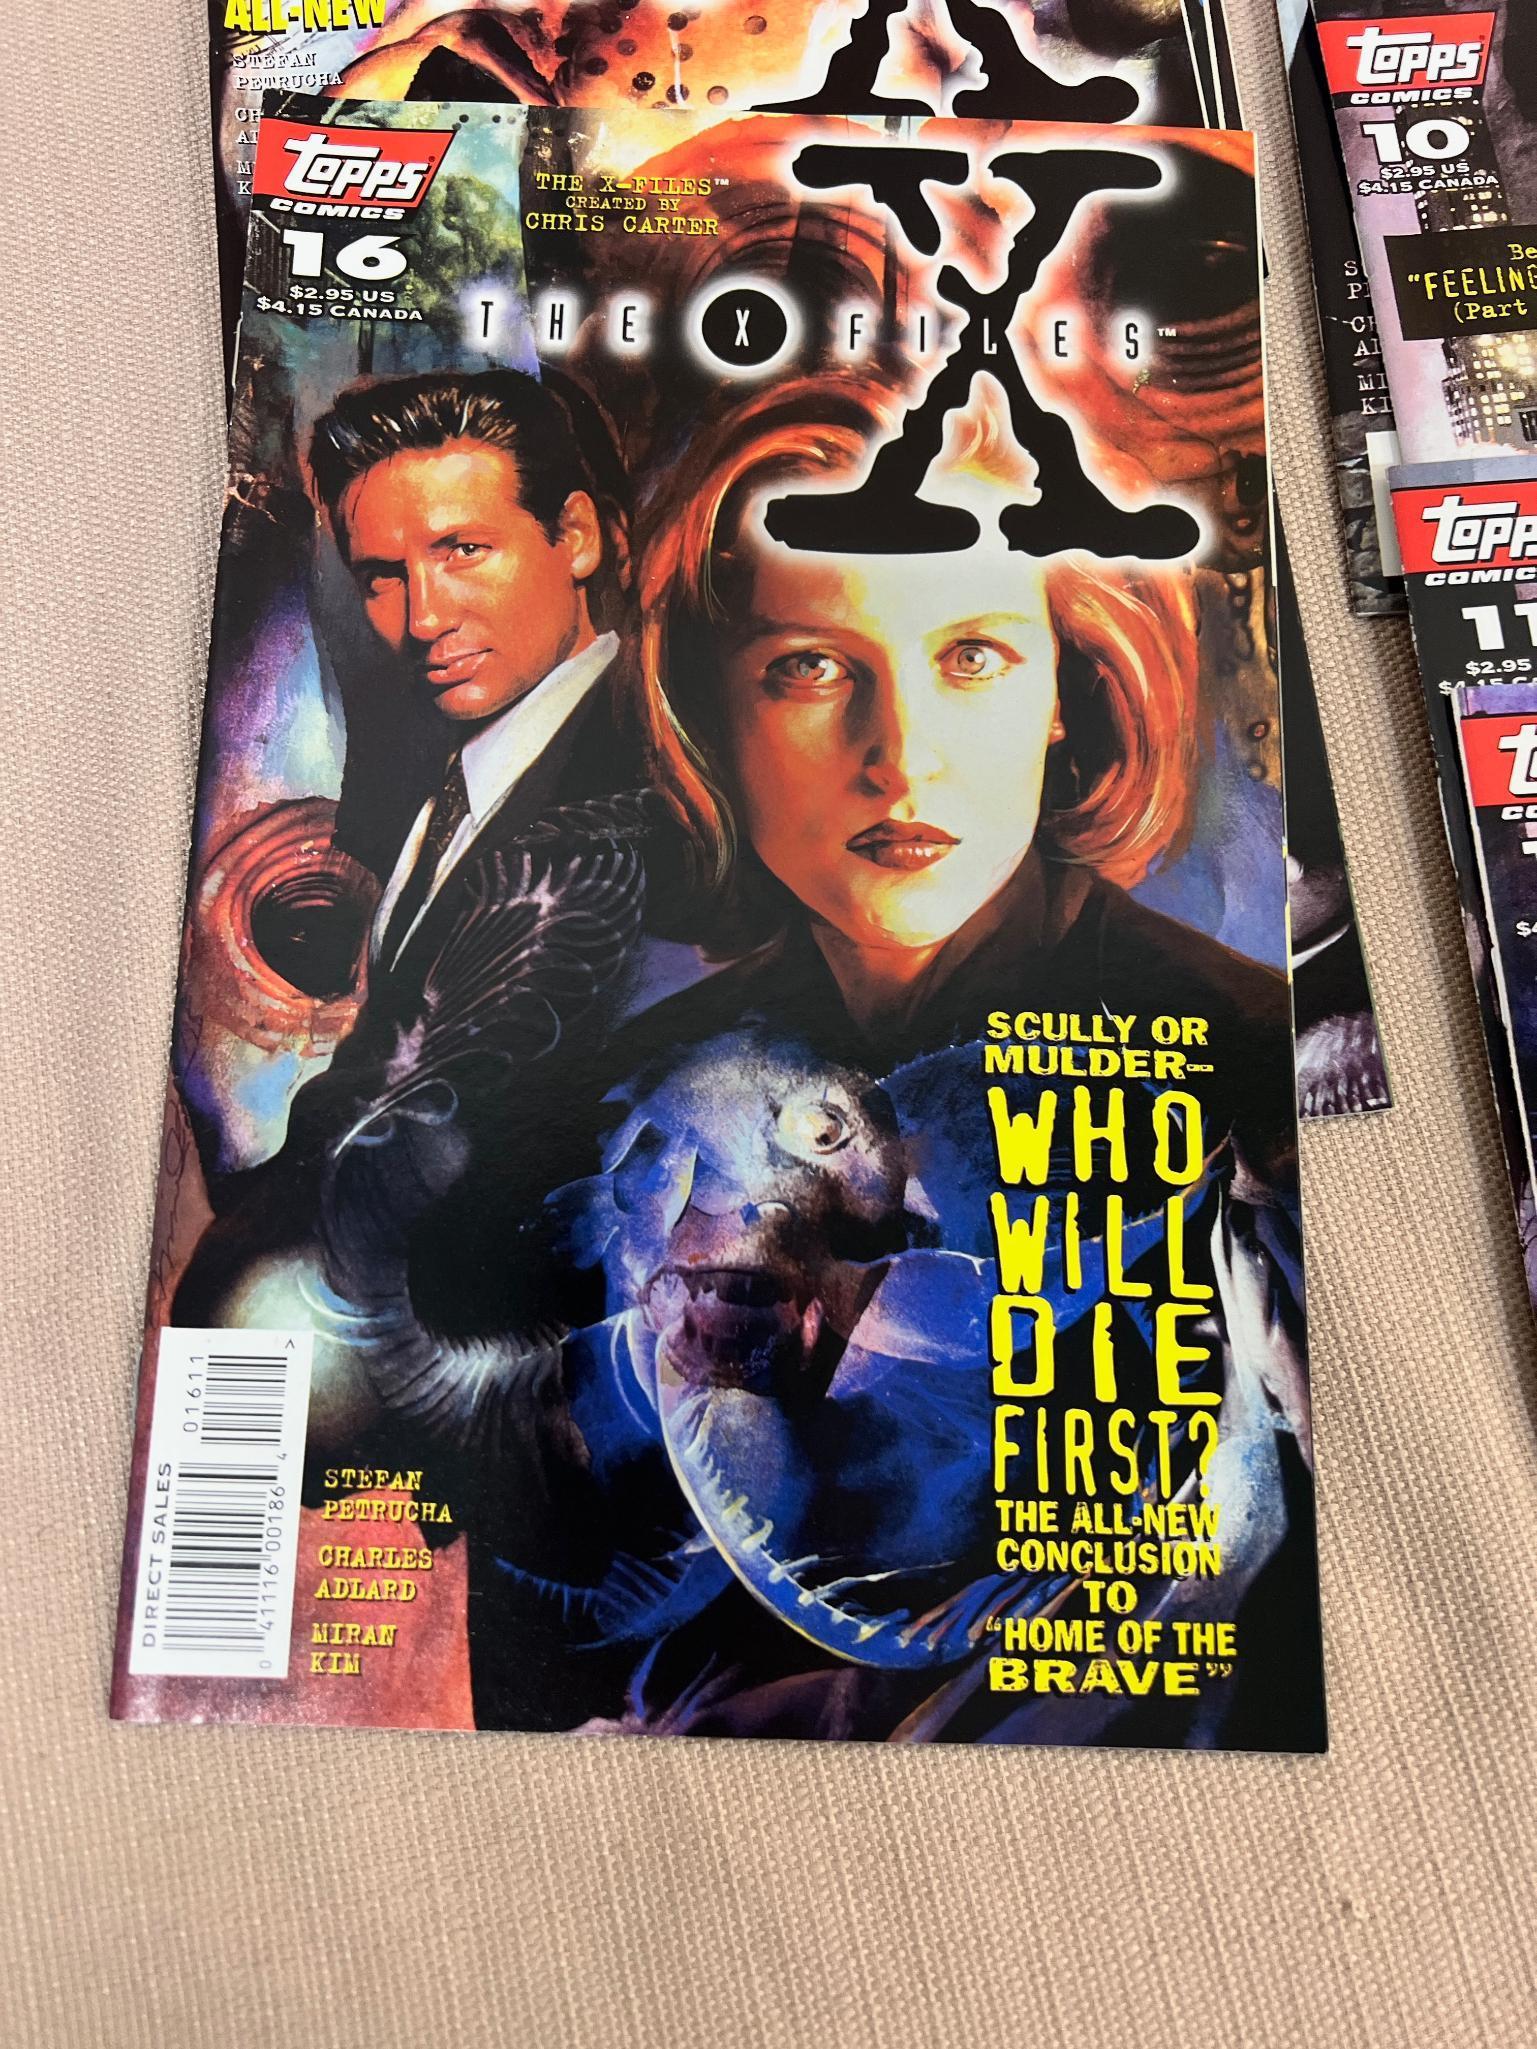 41 X-Files Comic Books, complete run of issues 1-41